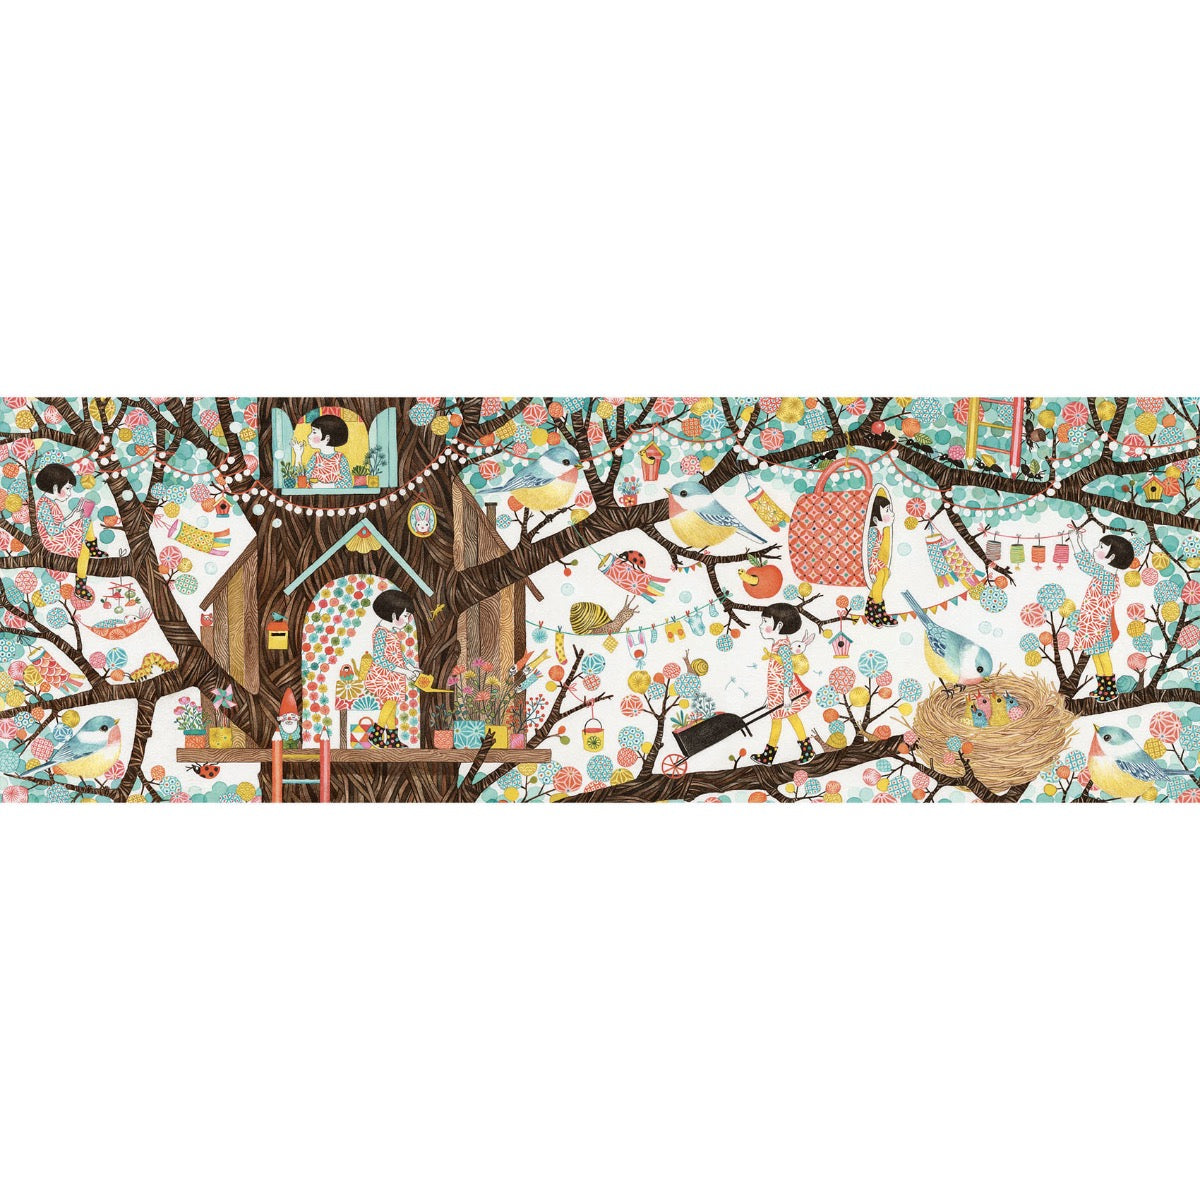 Djeco Gallery Jigsaw Puzzle Tree House, 200 Pieces